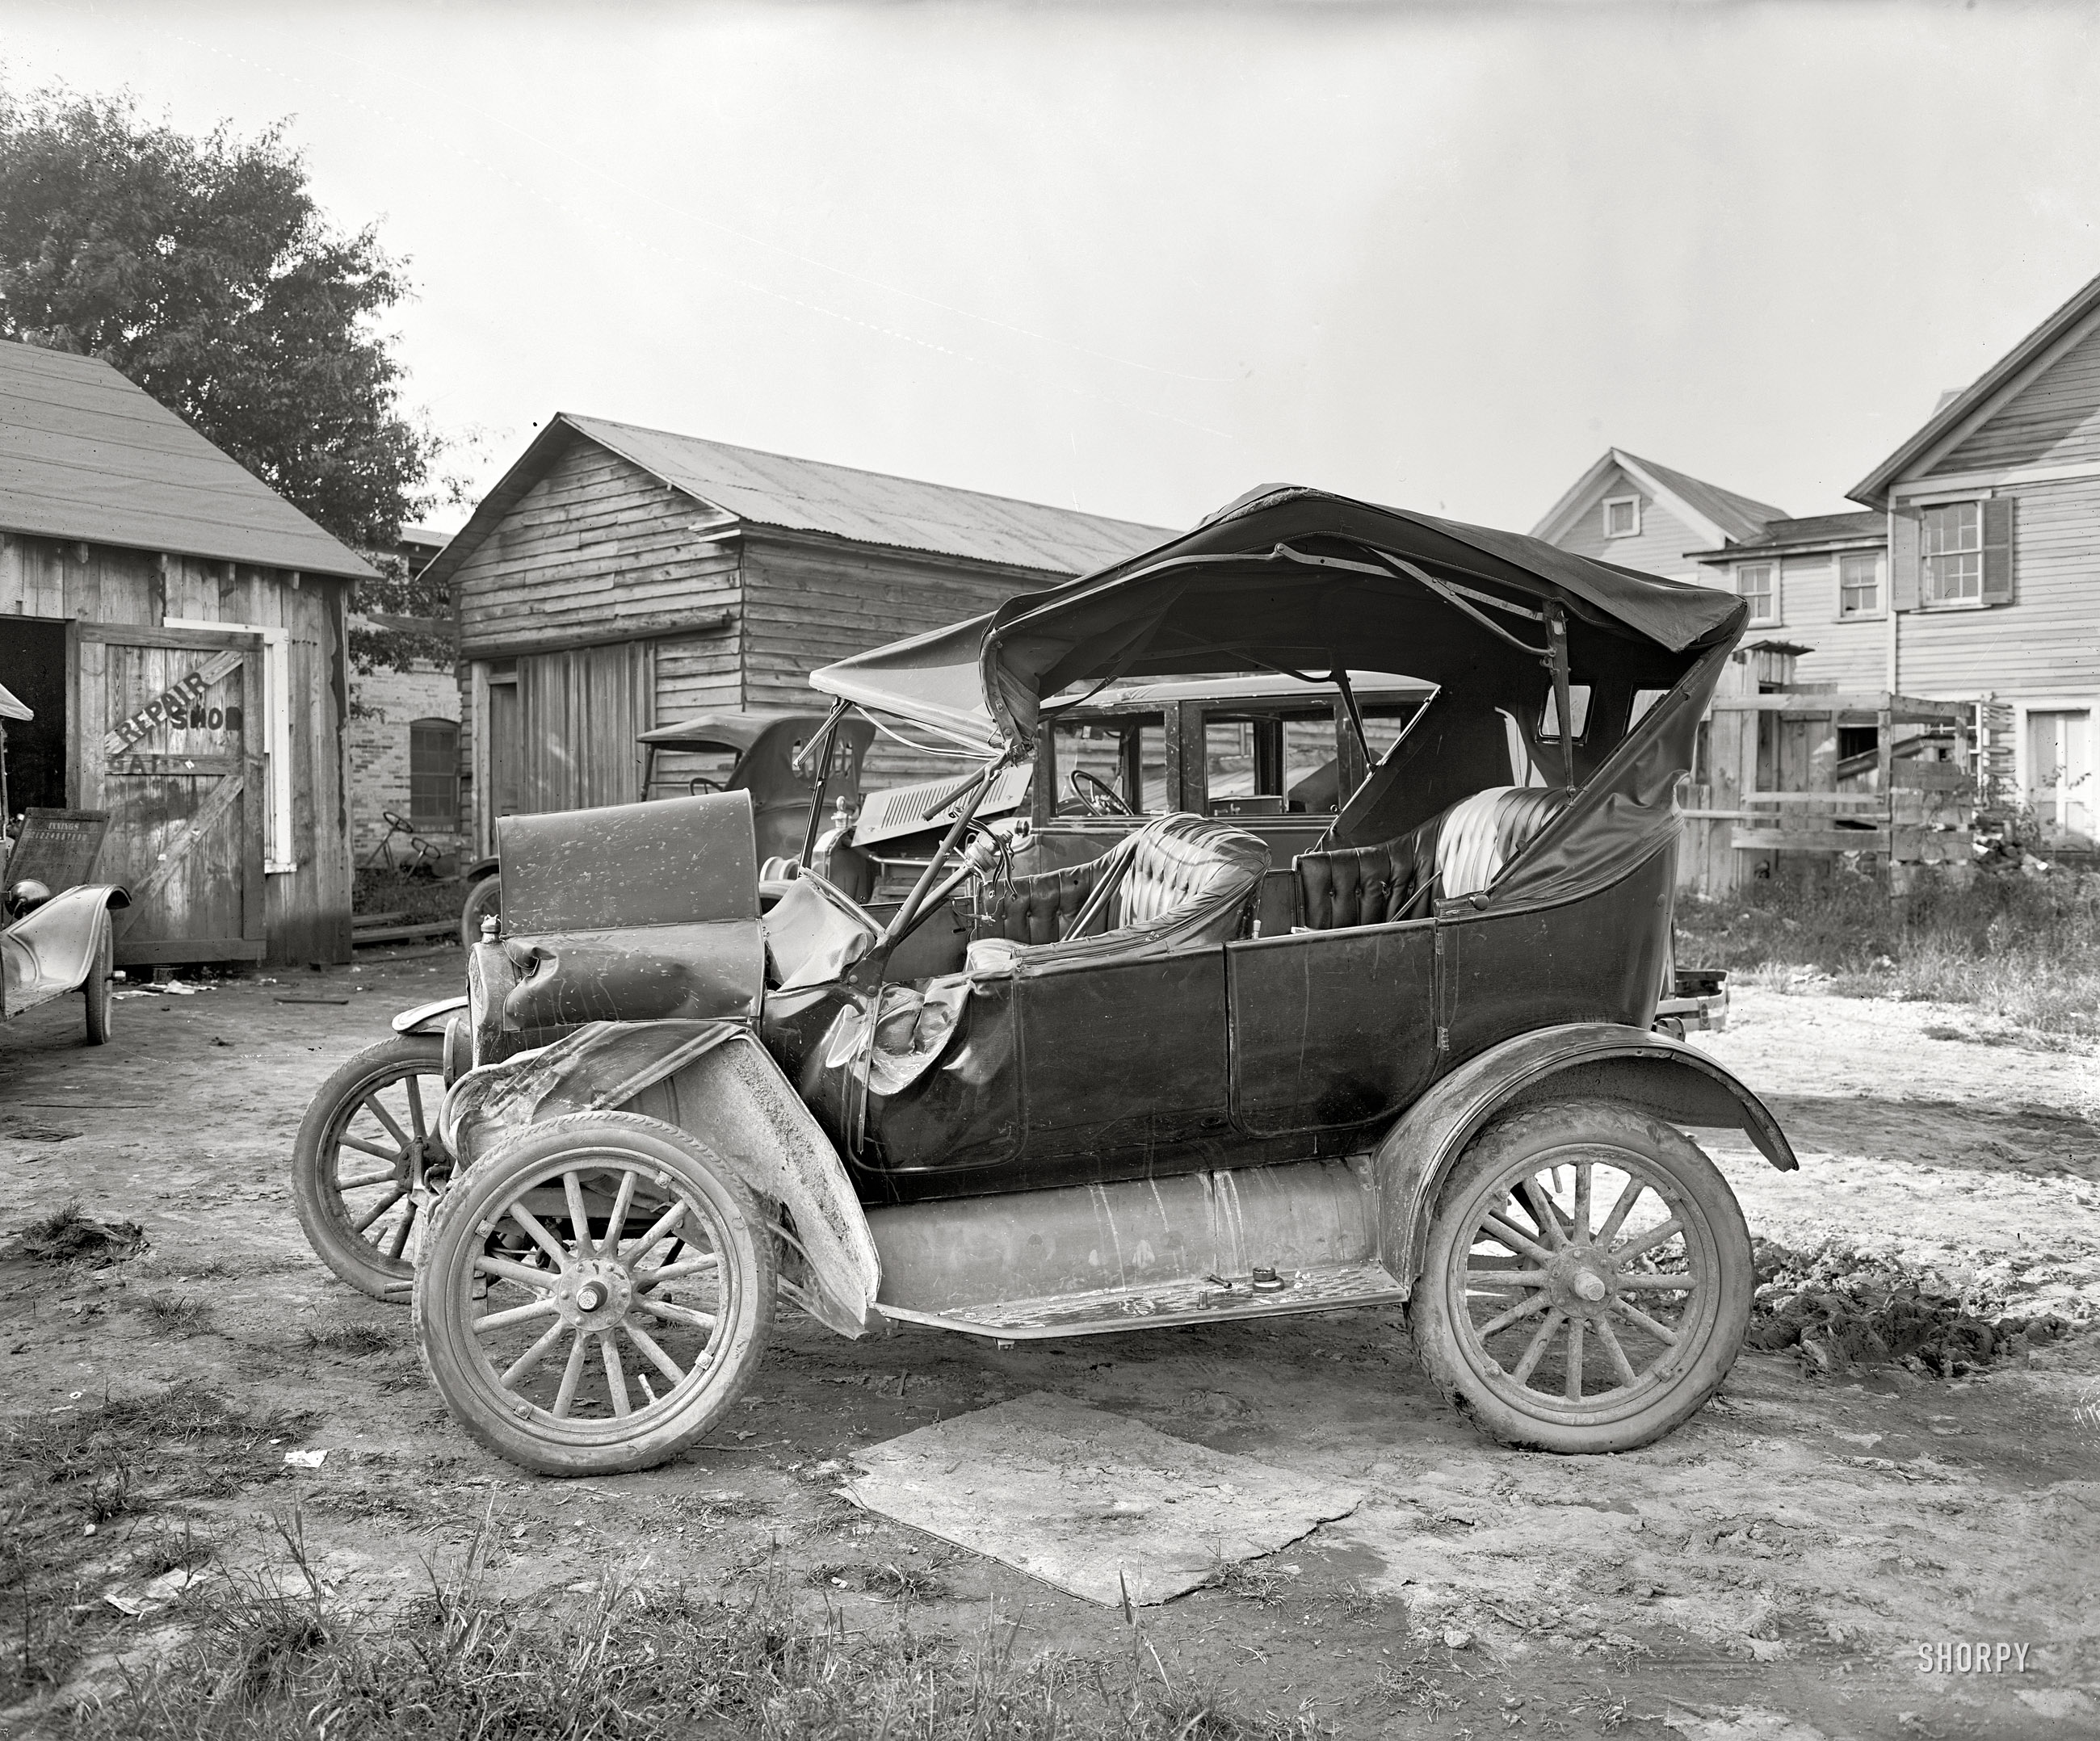 Washington, D.C., or vicinity, 1924. Exhibit C in the Case of the Battered Buick -- our third photo with the caption "Max Wiehle" and our second look at this tattered Model T, which we can now see is at a "Repair Shop Garage." Where the mechanics seem to be following the baseball scores. View full size.